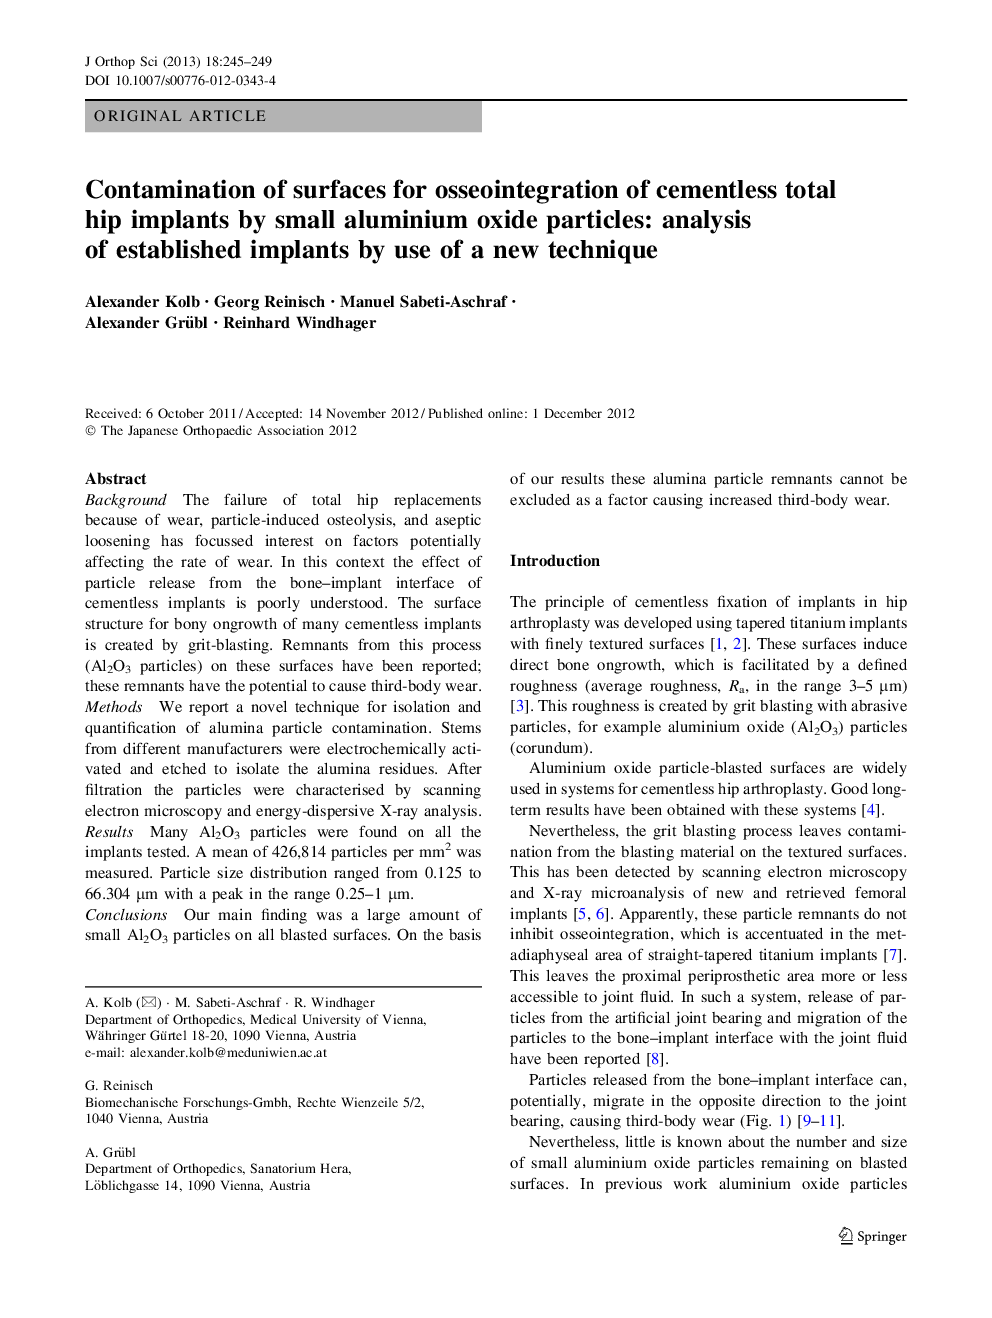 Contamination of surfaces for osseointegration of cementless total hip implants by small aluminium oxide particles: analysis of established implants by use of a new technique